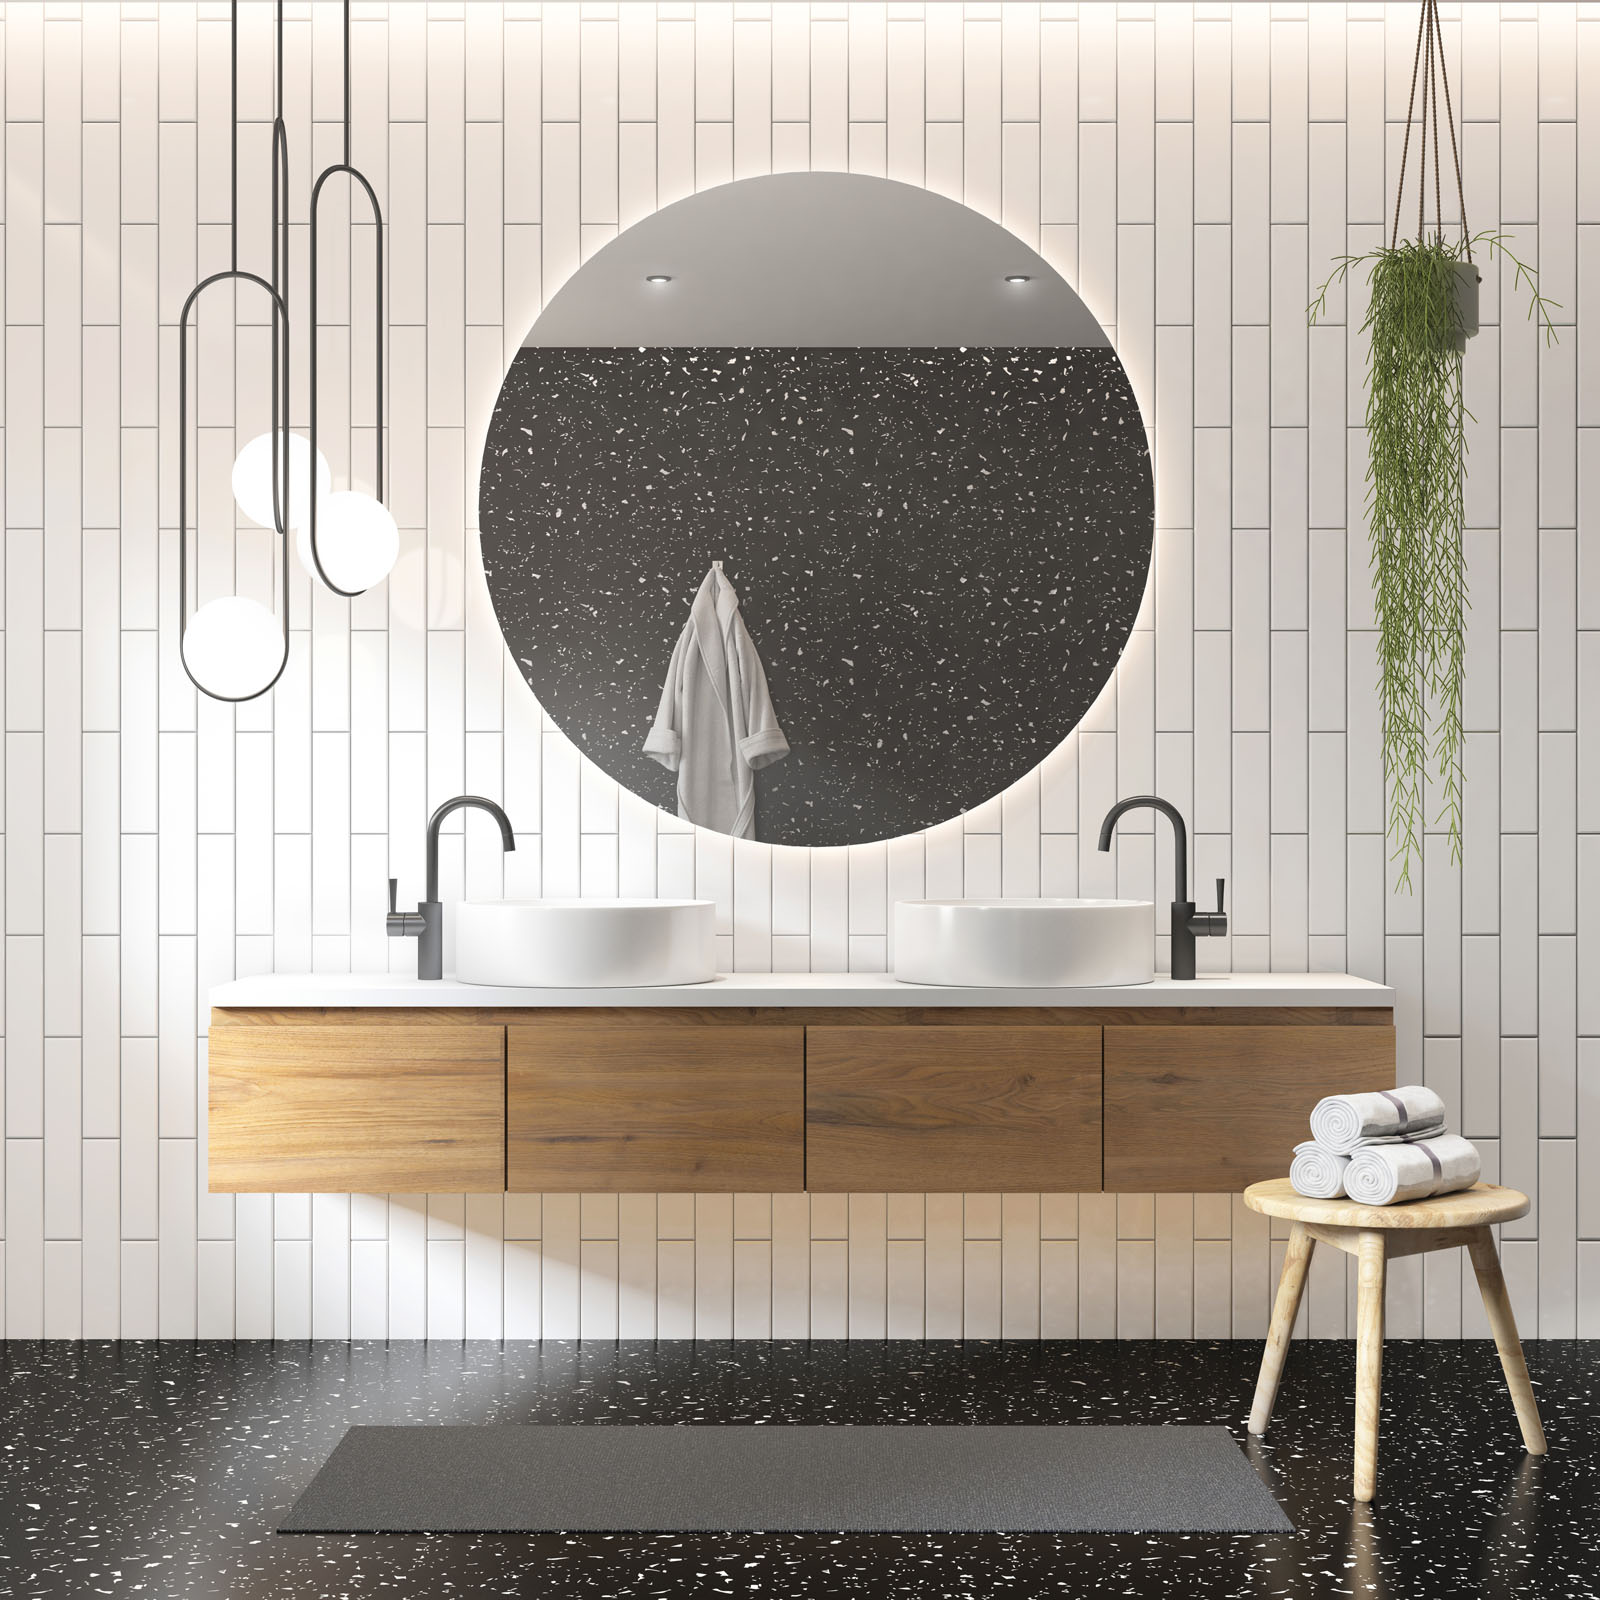 3d rendering of a white and grey contemporary modern bathroom	with blck terrazzo floor a wooden stool and modern retro hanging lamps